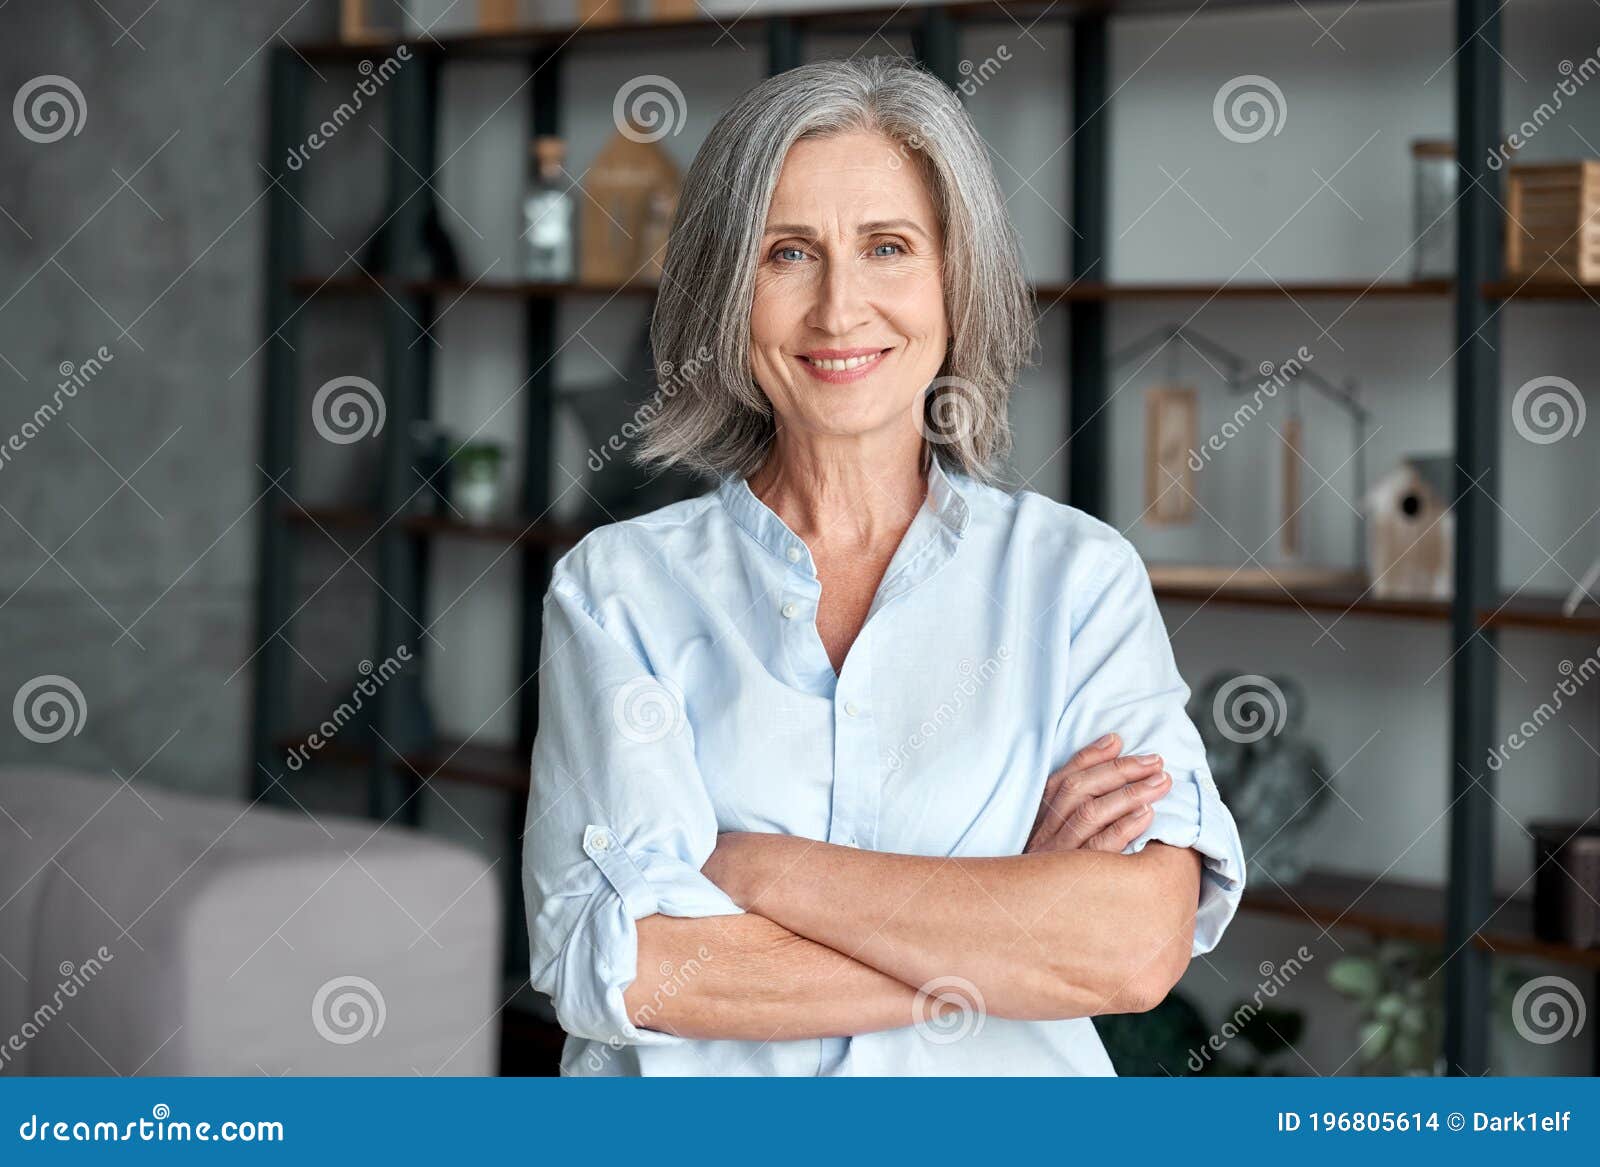 smiling confident middle aged woman standing arms crossed in office, portrait.